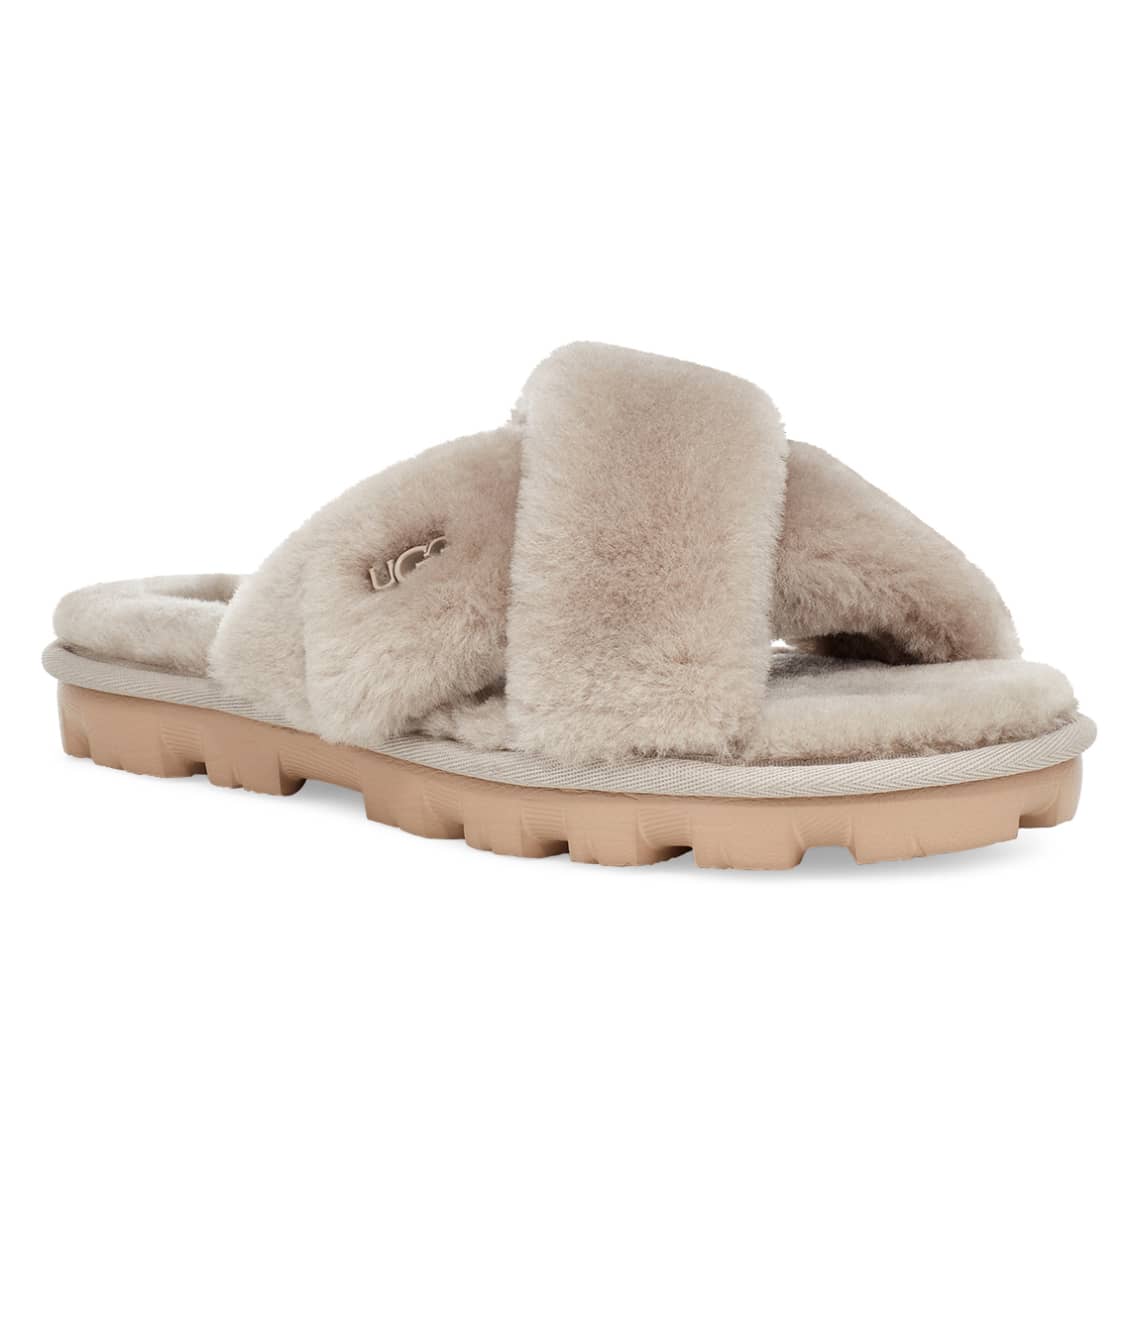 UGG Fuzette Slides & Reviews | Bare Necessities (Style 1107955)